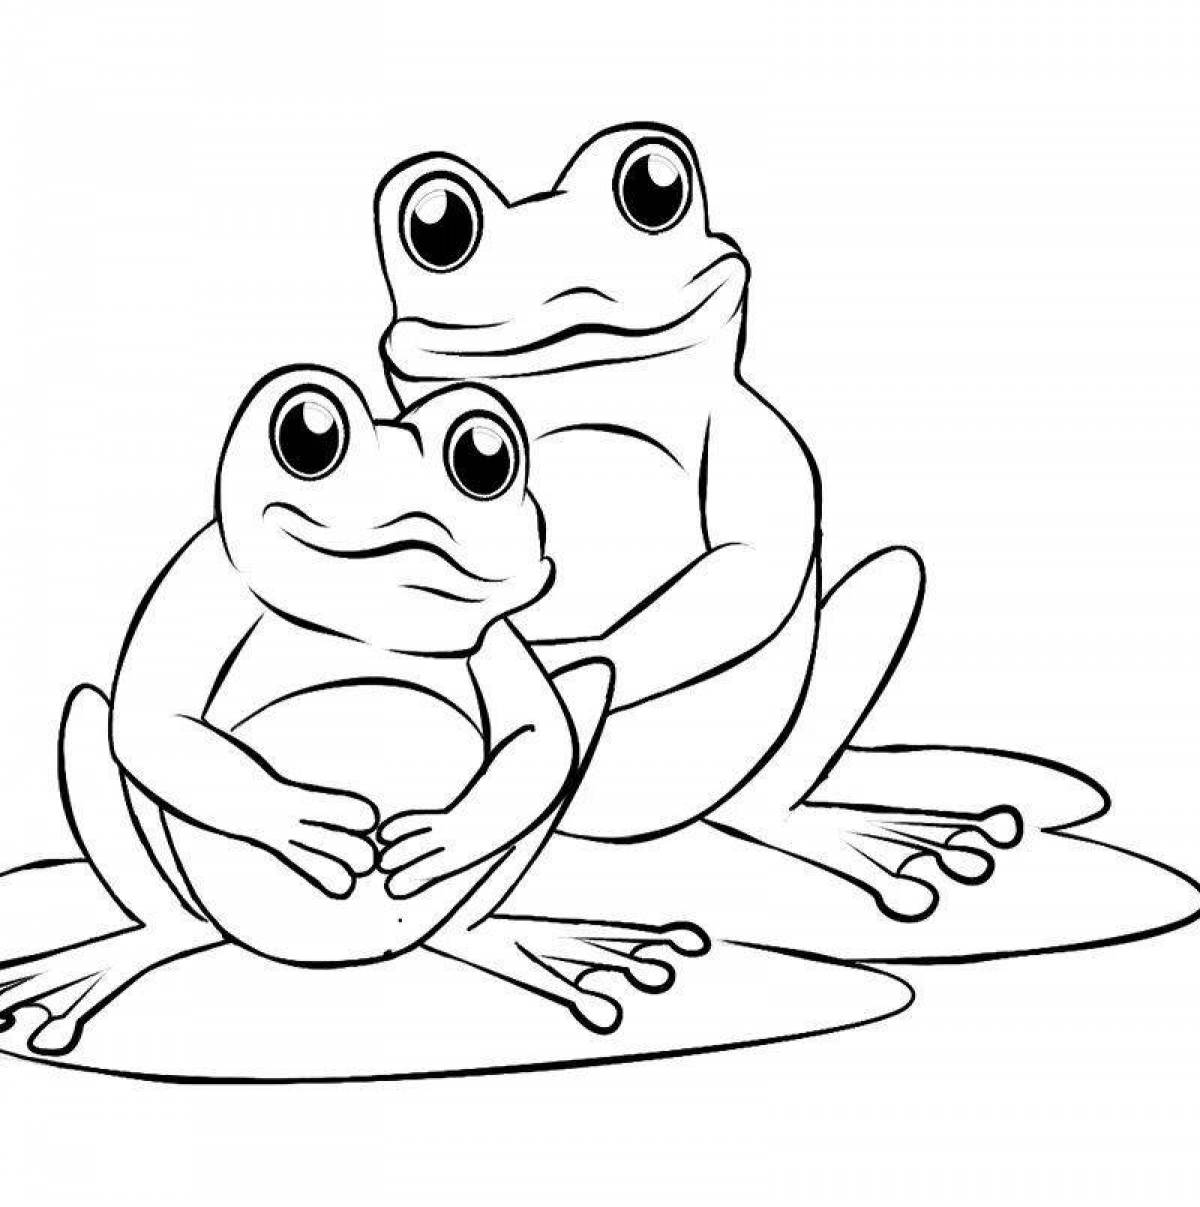 Impressive frog pattern coloring page